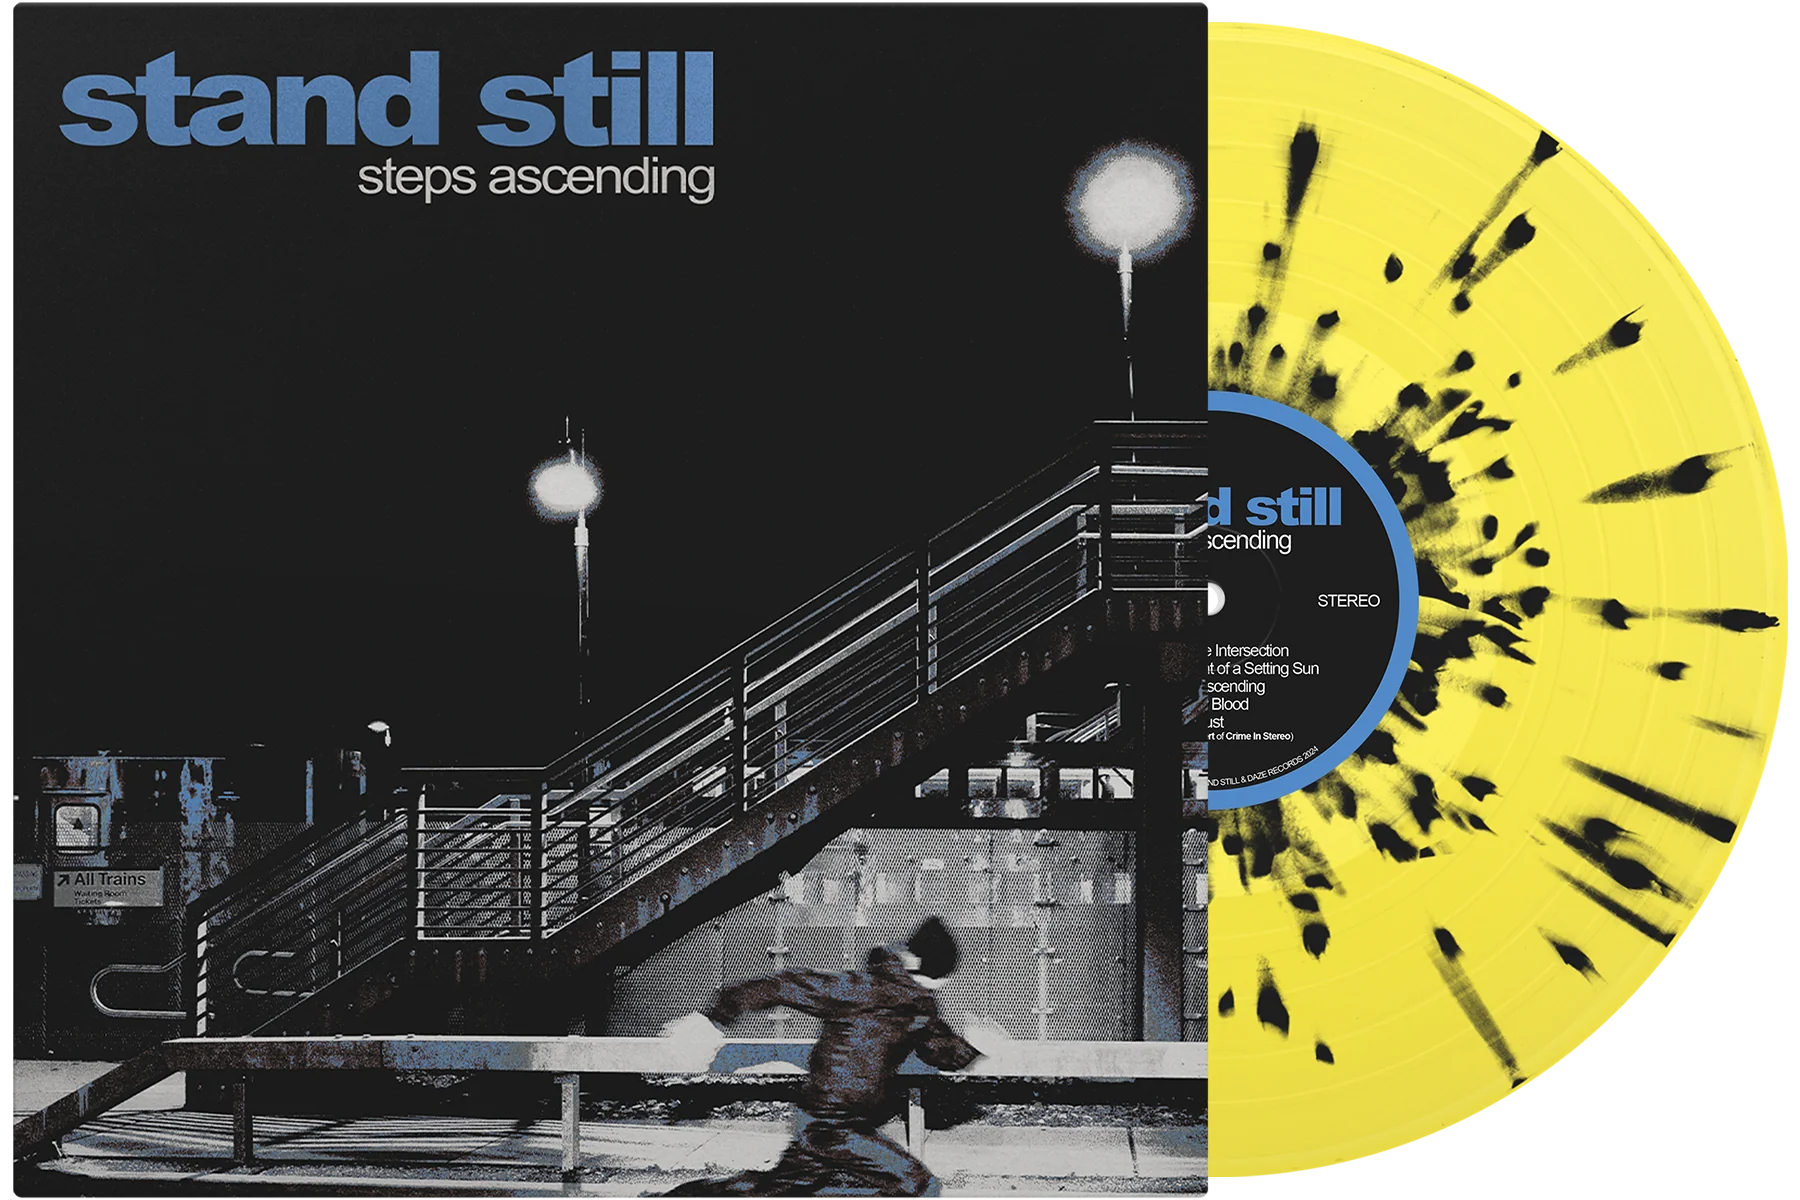 PRE-ORDER: STAND STILL 'Steps Ascending' LP / YELLOW WITH BLACK SPLATTER EDITION!